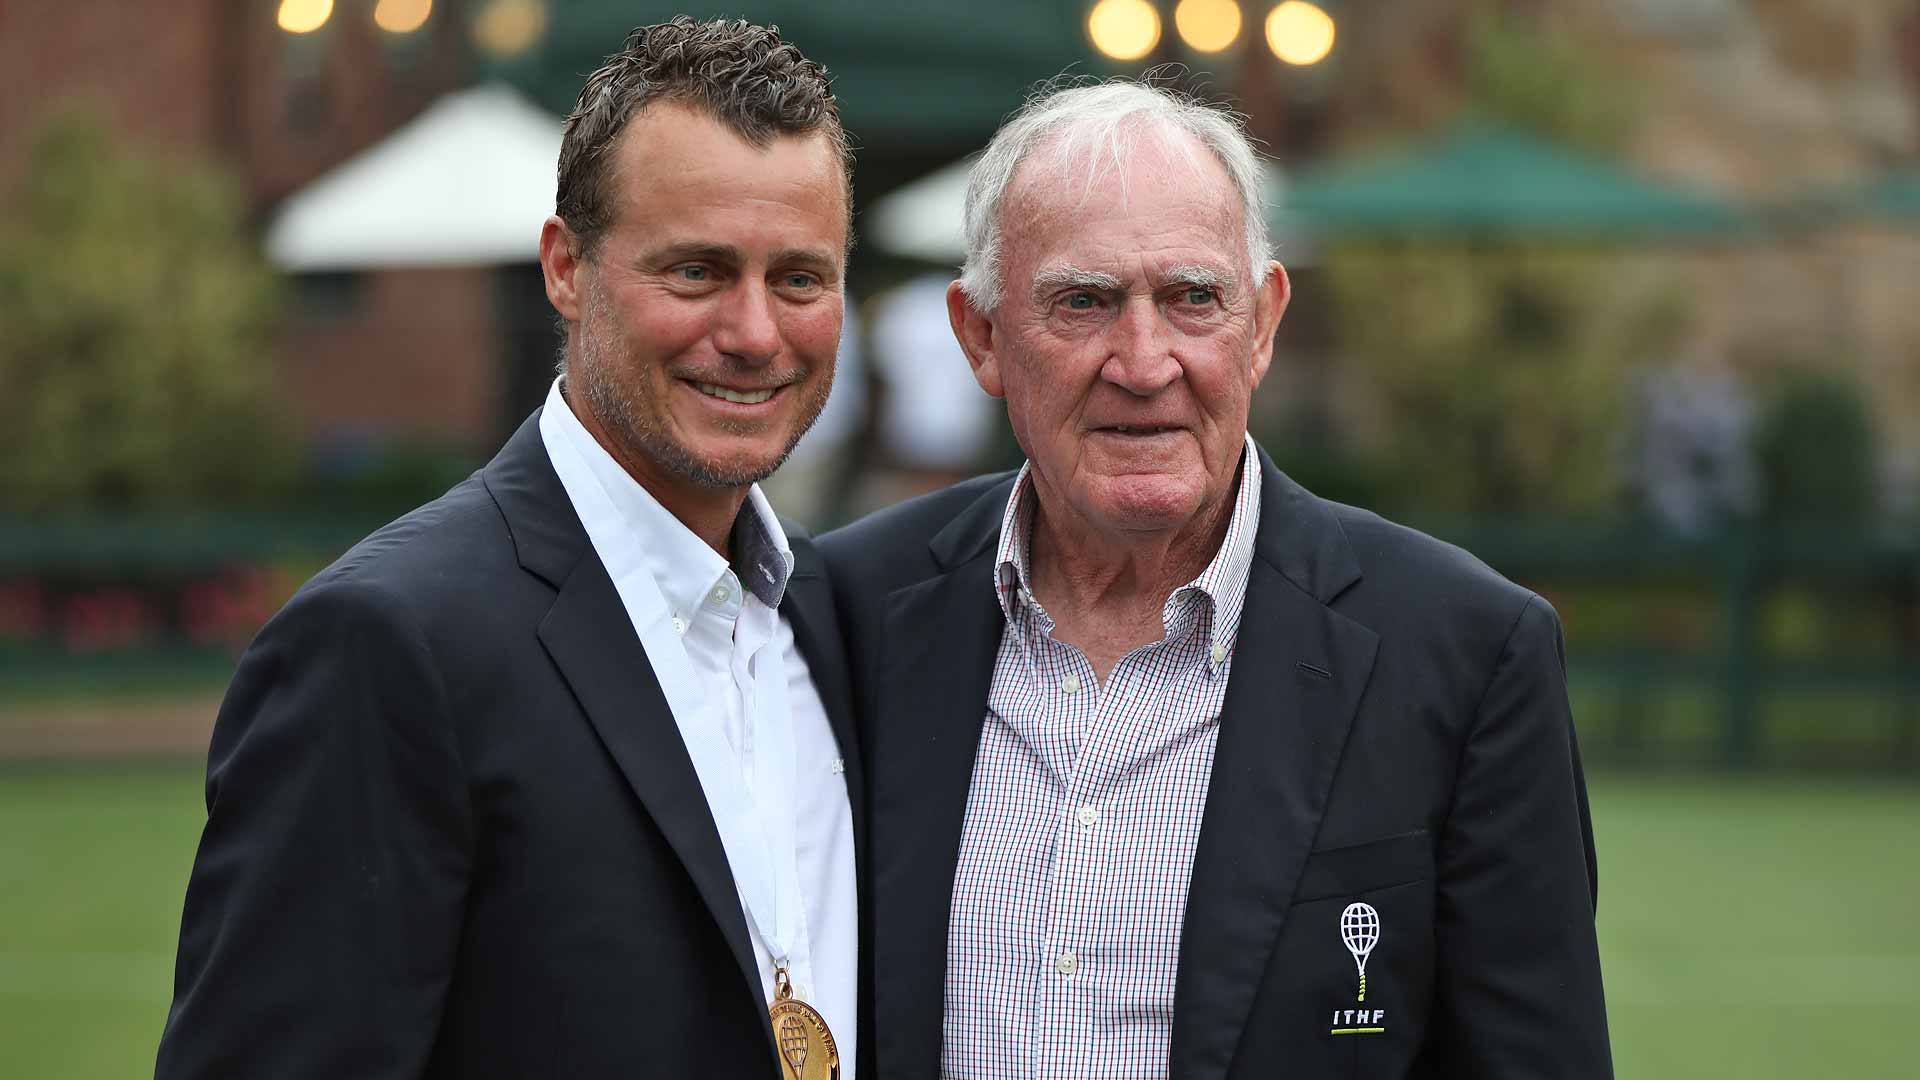 <a href='https://www.atptour.com/en/players/lleyton-hewitt/h432/overview'>Lleyton Hewitt</a> poses with one of his mentors, <a href='https://www.atptour.com/en/players/tony-roche/r073/overview'>Tony Roche</a>